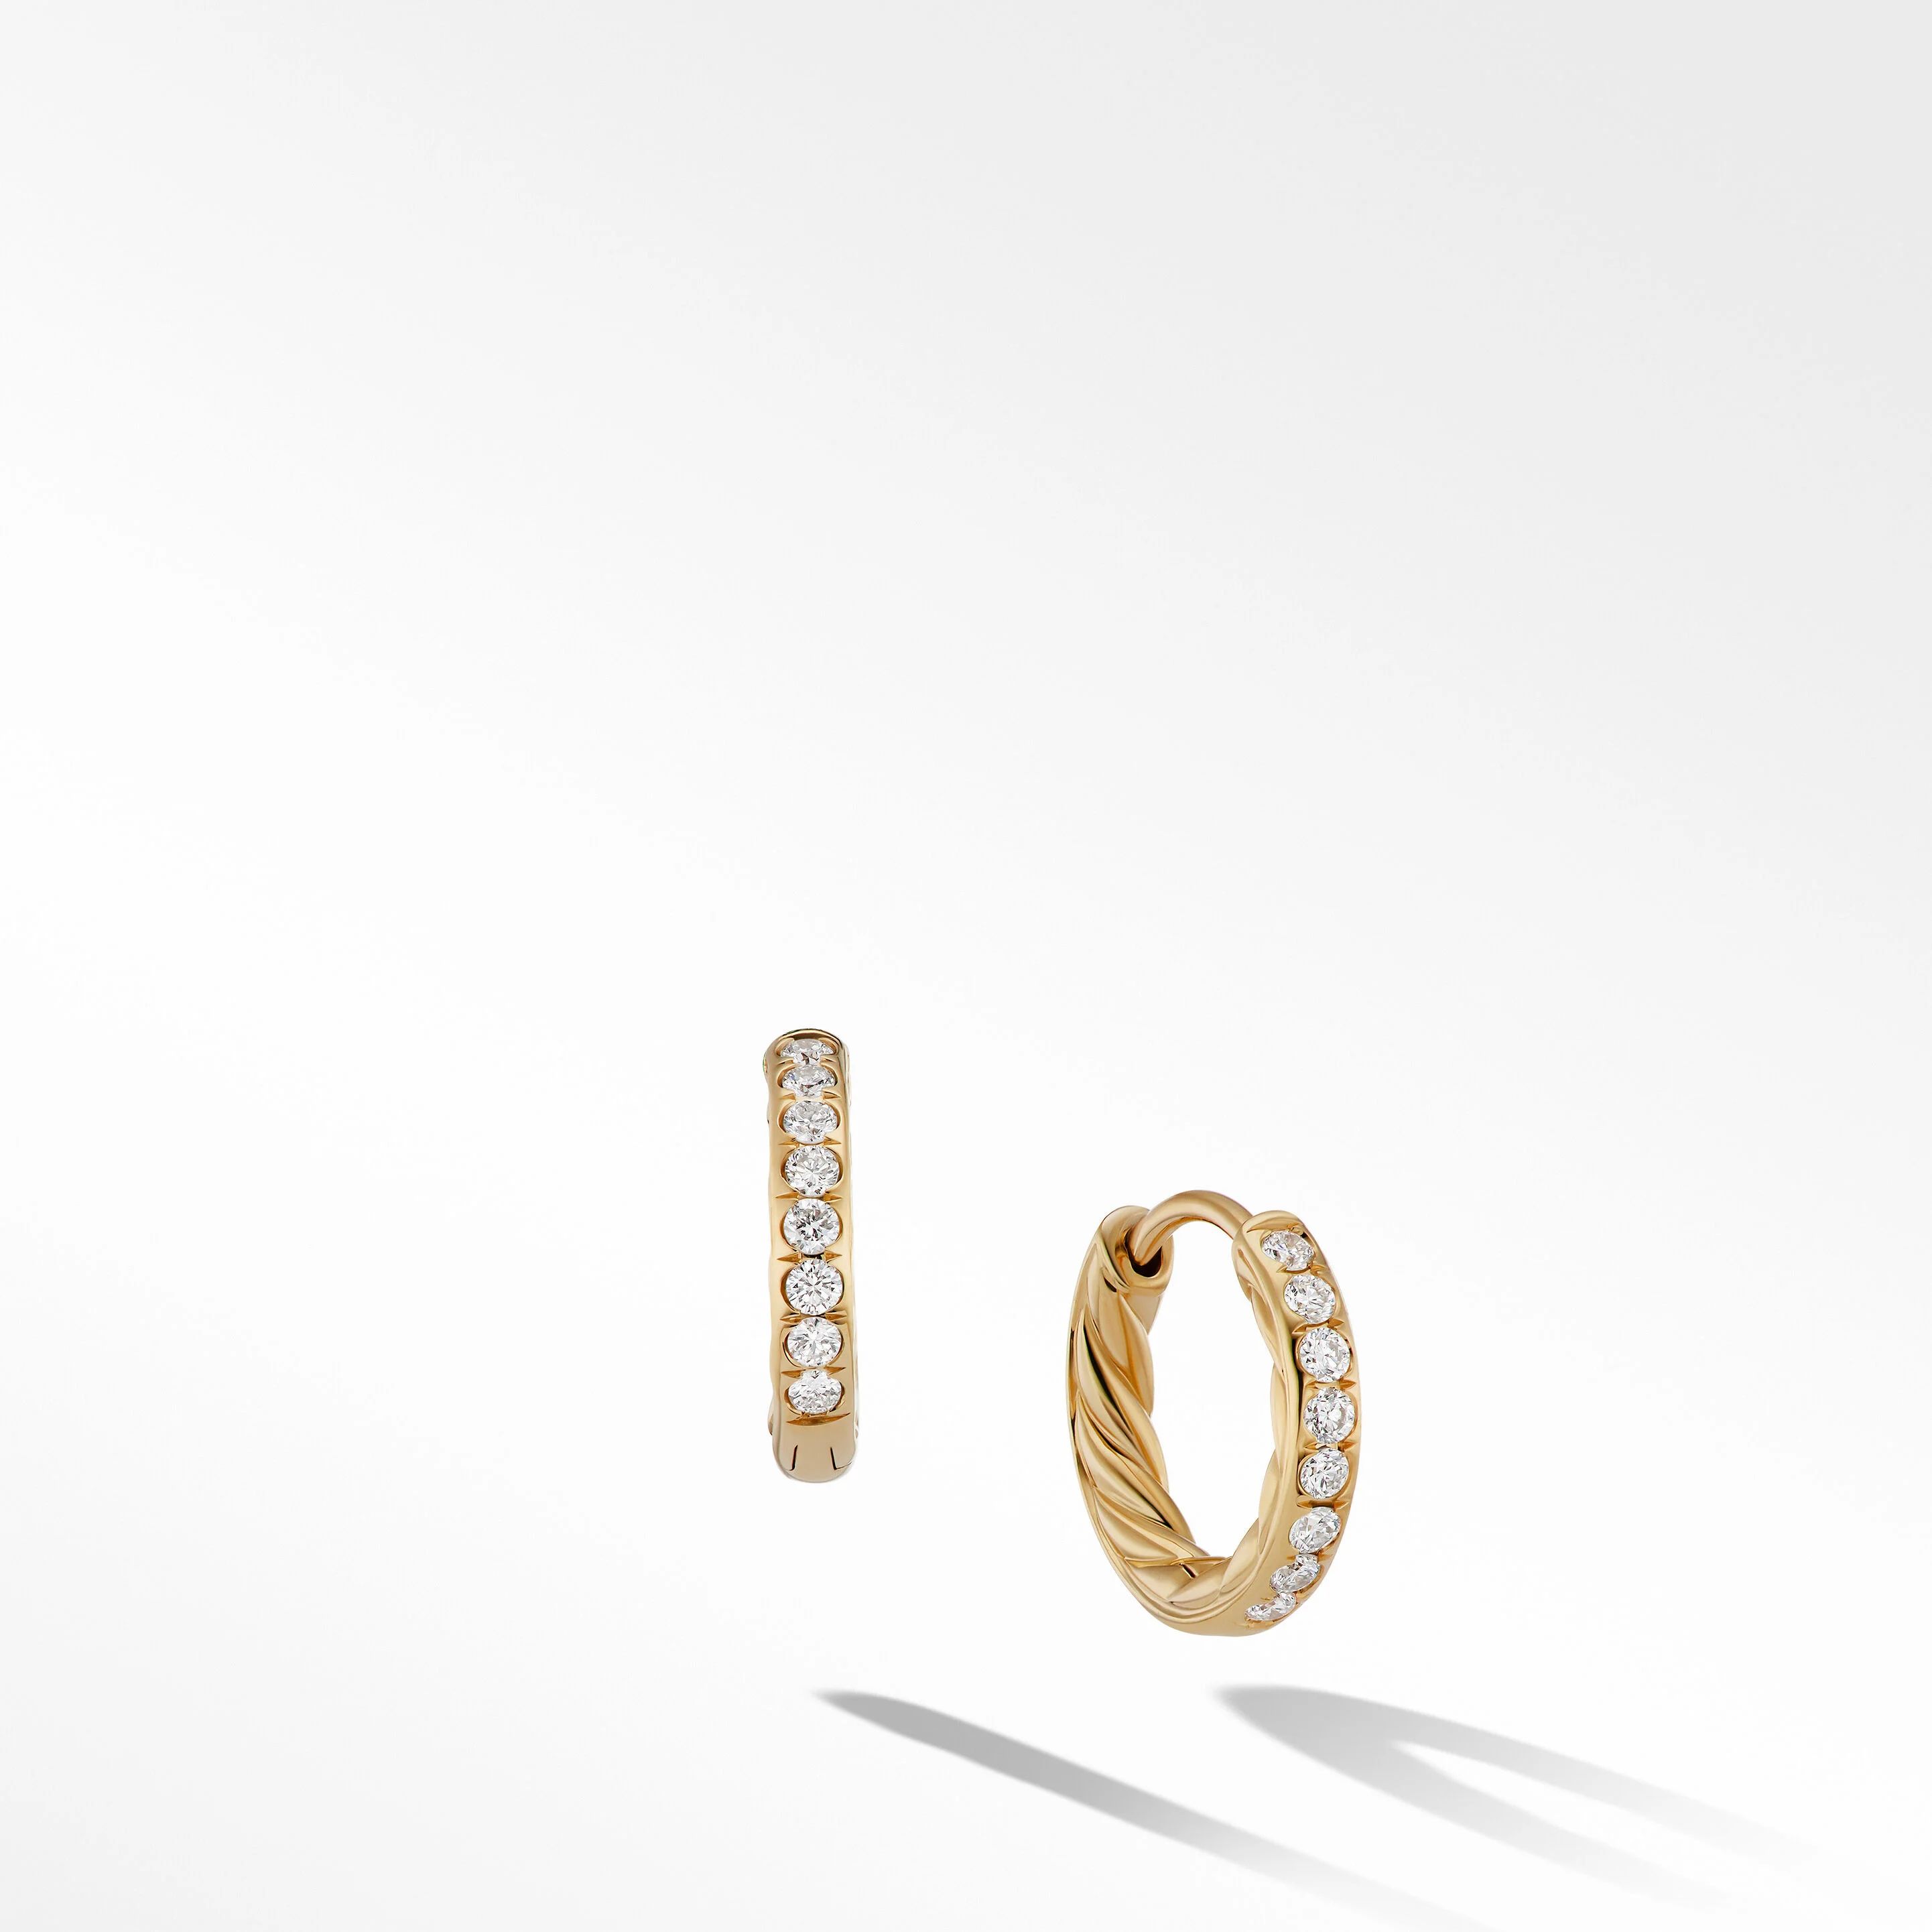 Sculpted Cable Huggie Hoop Earrings in 18K Yellow Gold with Pavé Diamonds | David Yurman